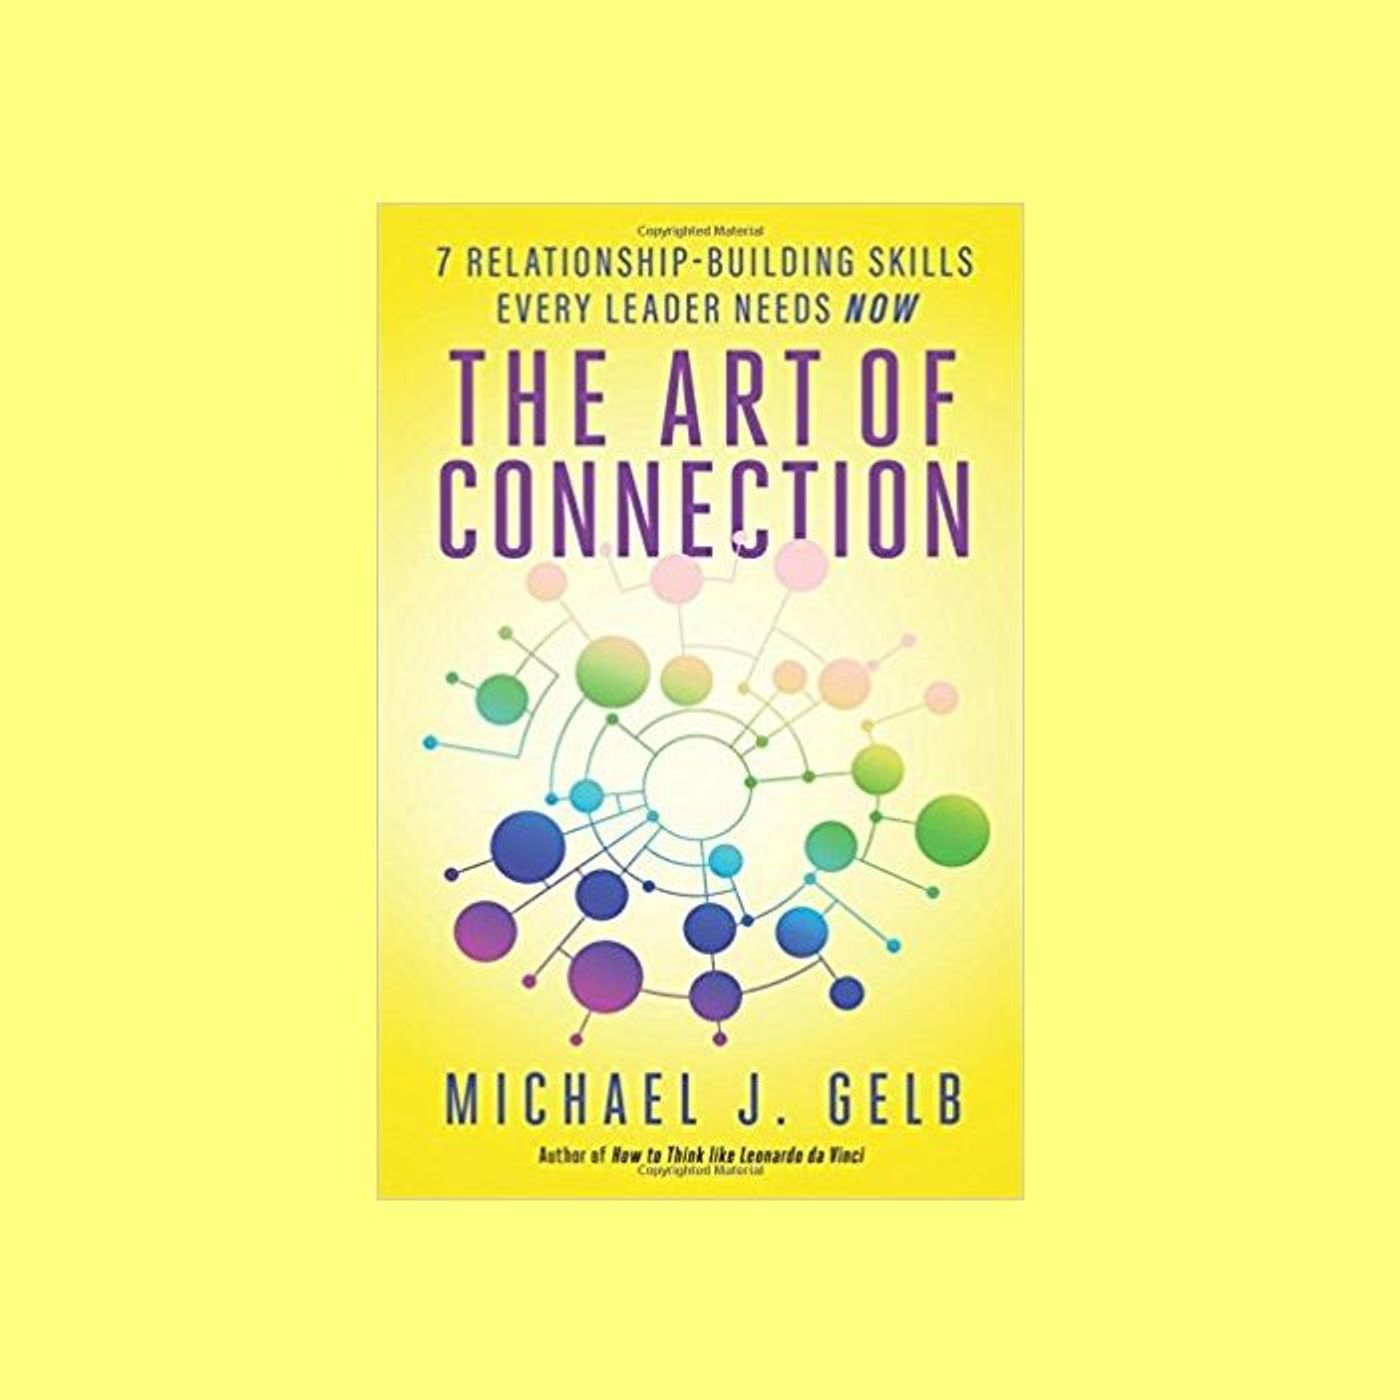 E3 Michael Gelb - The Art of Connection